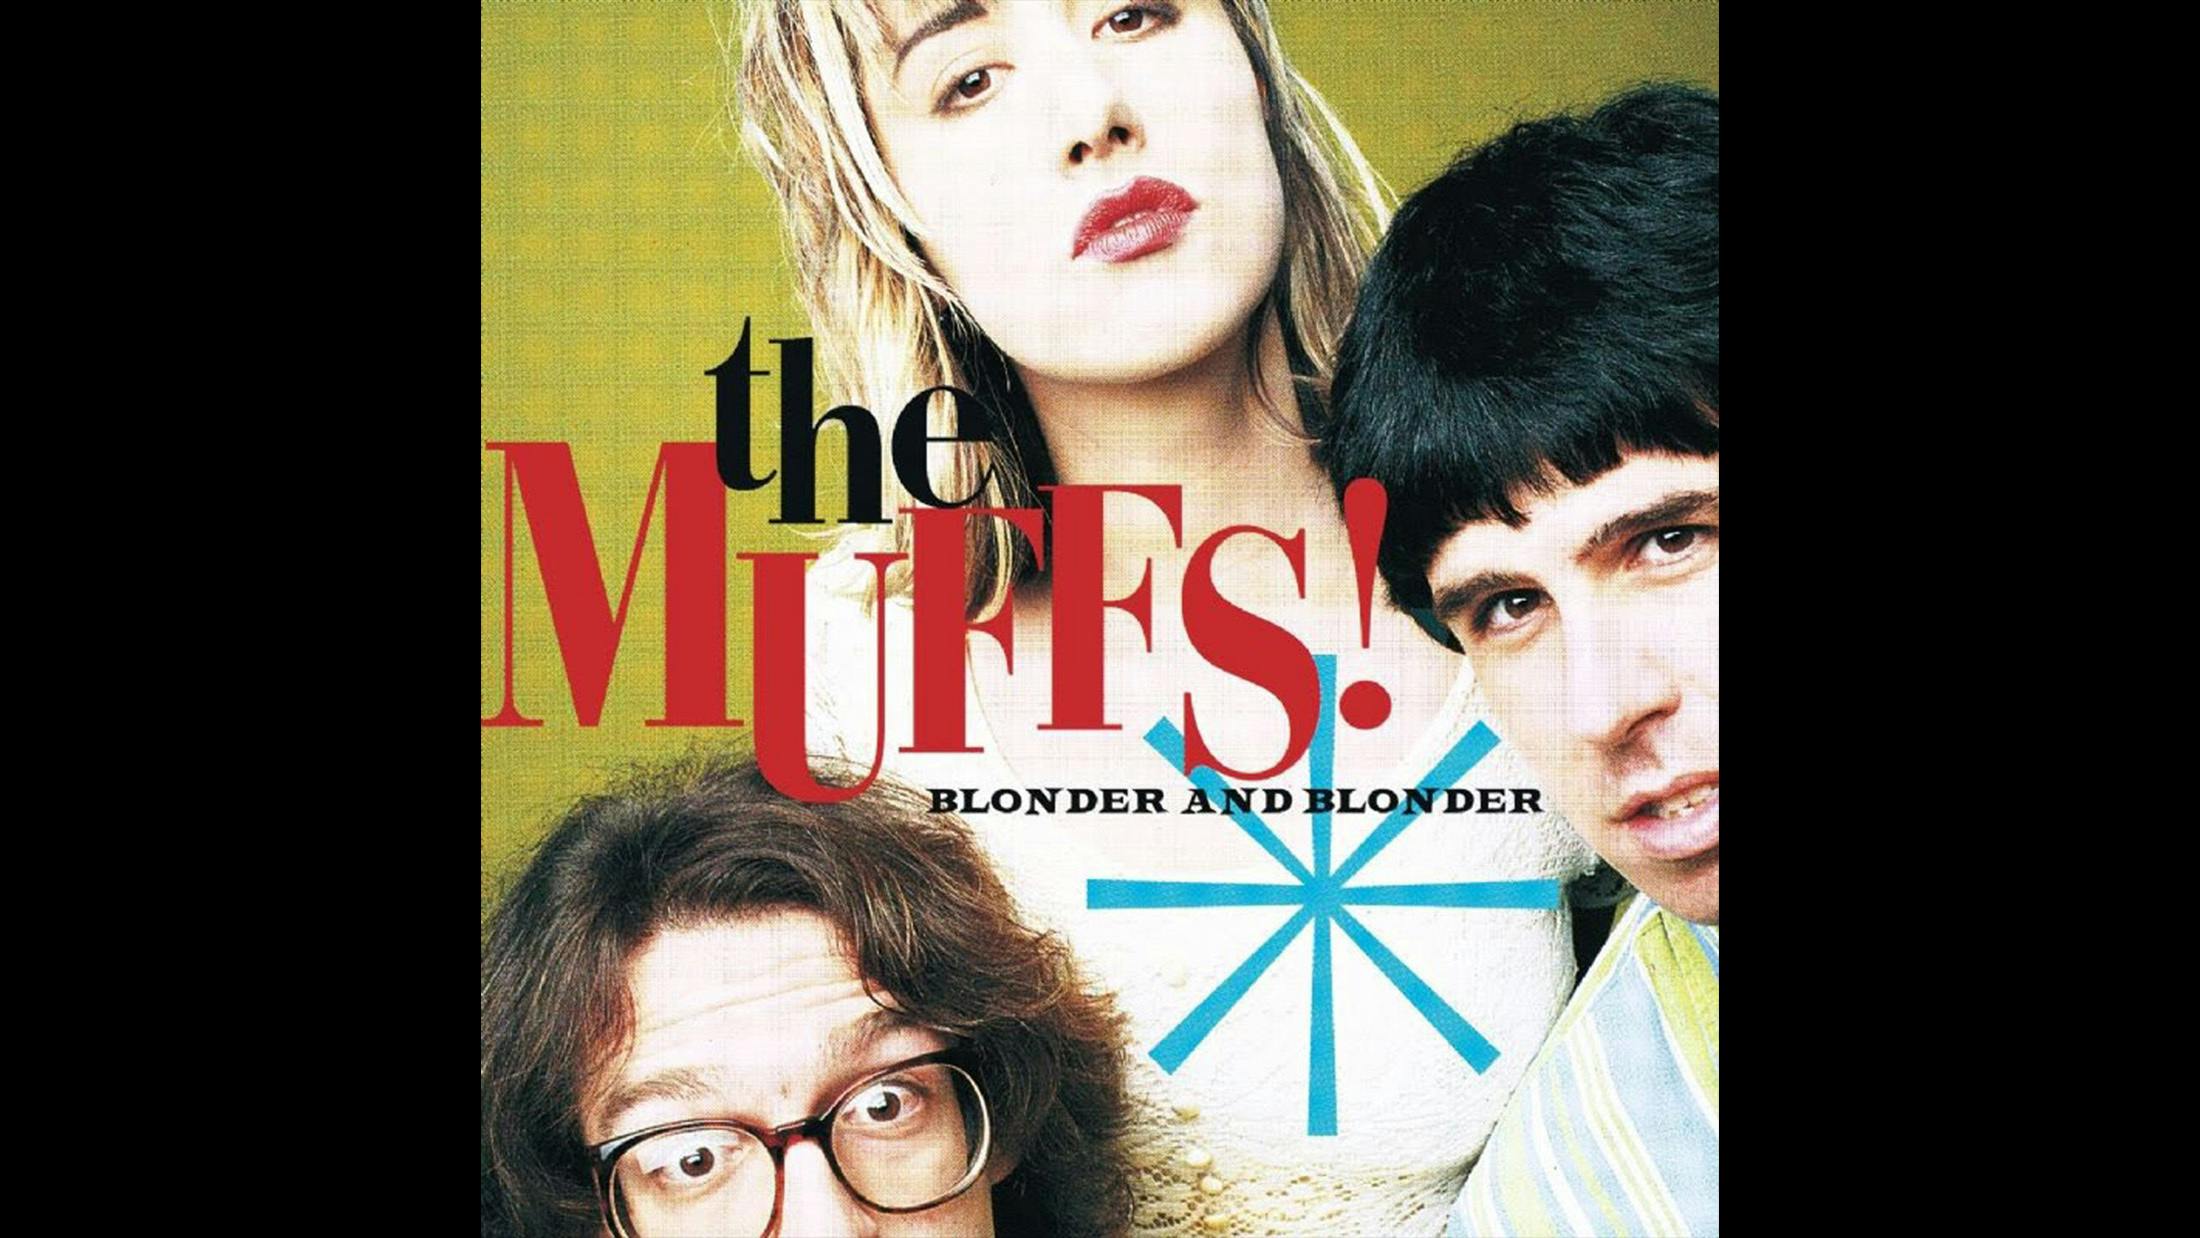 Excluding a brief period where singer Kim Shattuck picked up a bass for the then Kim Deal-less Pixies in 2013, the LA lady has led The Muffs since their origin in 1991. This, their second album, is the best showcase of their pop-punk earworms, as well as that voice – sort of like an angel gargling razorblades.